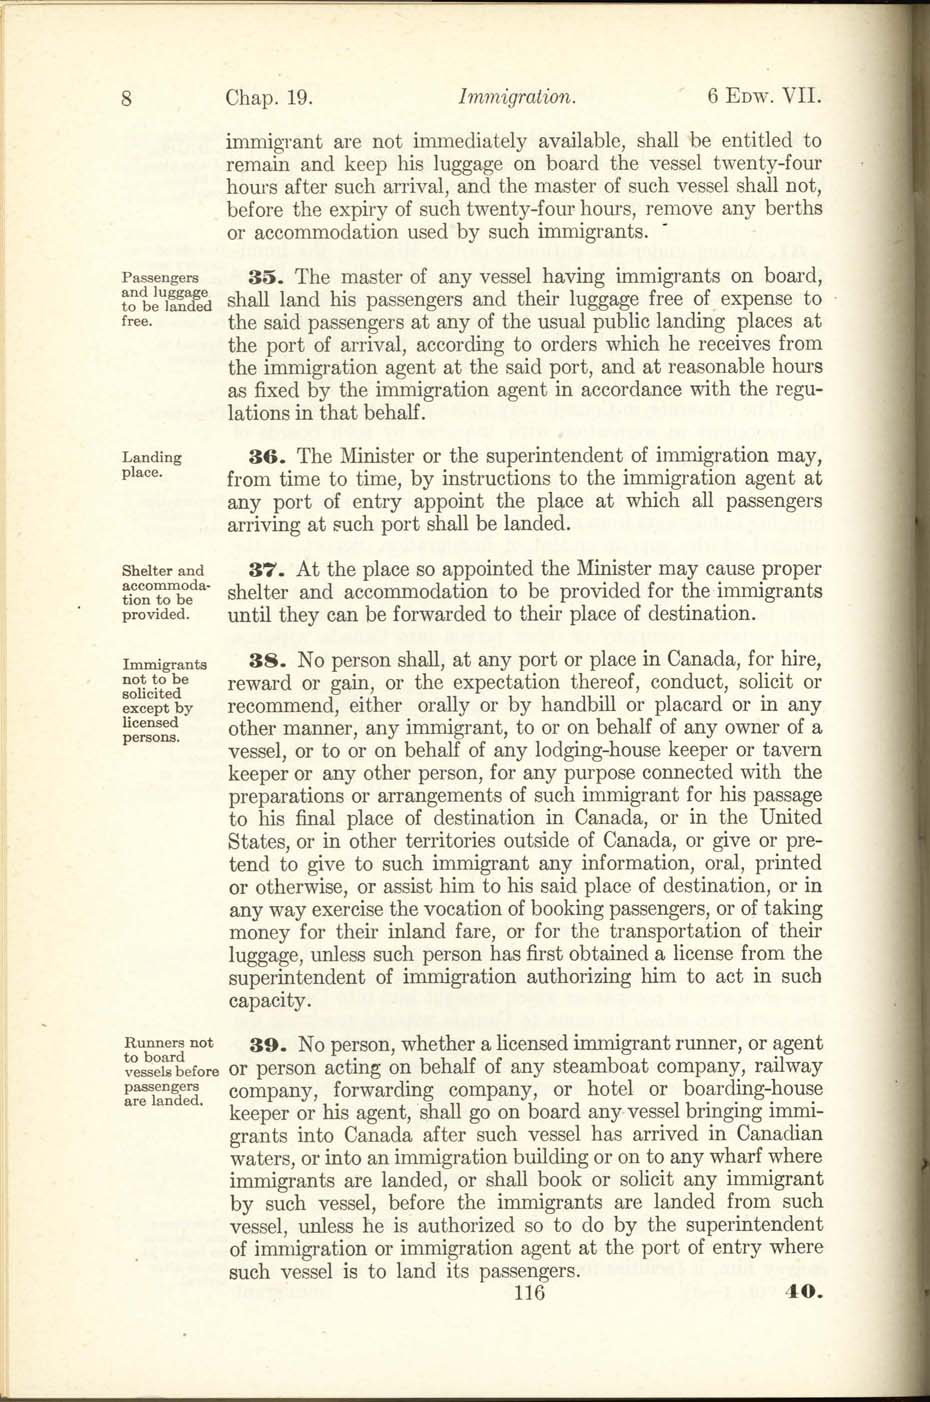 Chap. 19 Page 116 Immigration Act, 1906